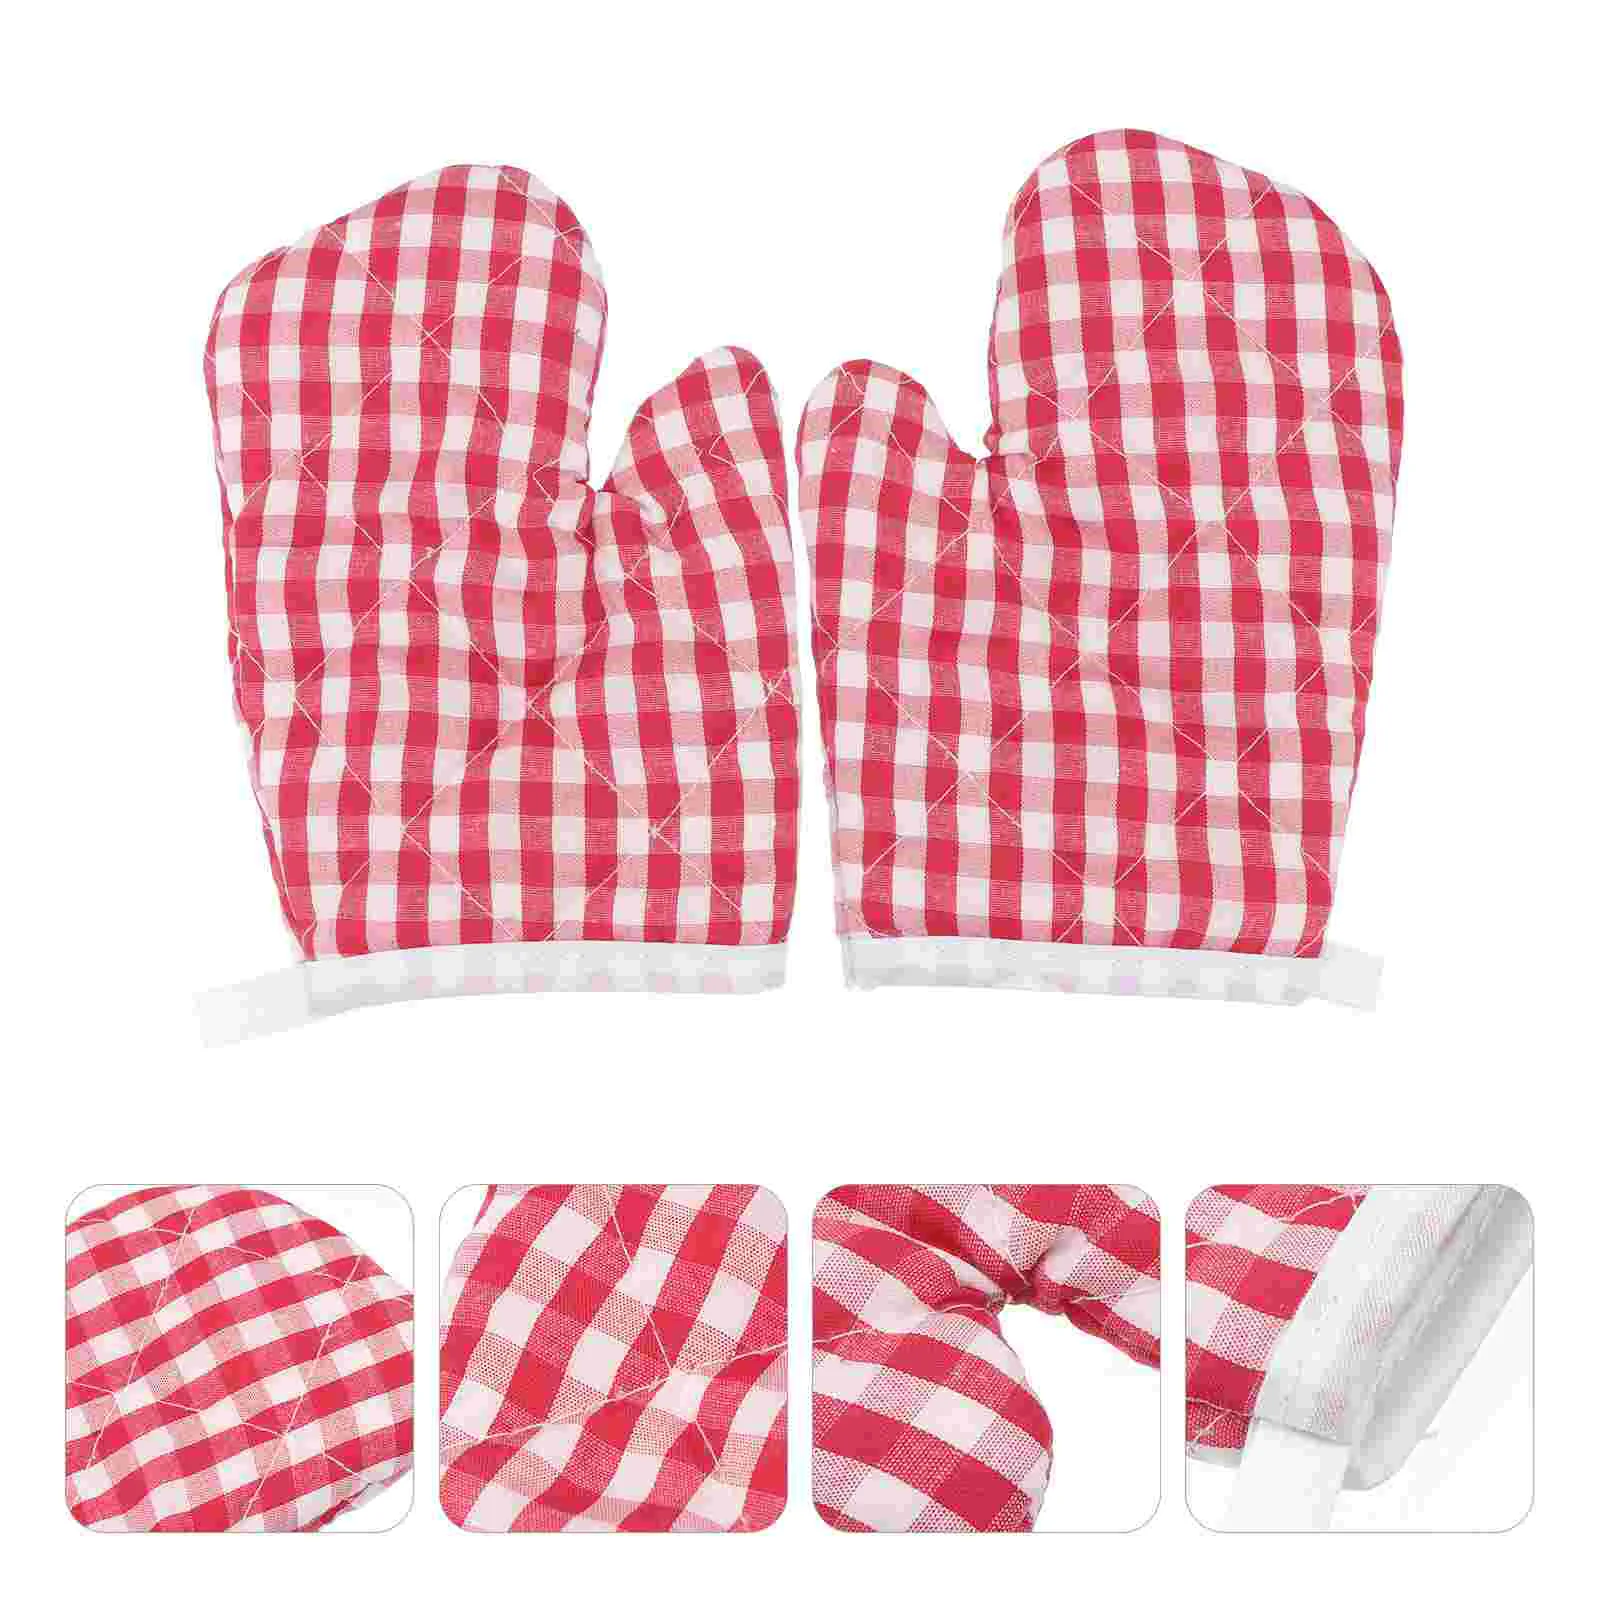 2 Pcs Bbq Mittens Microwave Toaster Pot Holder Gloves Small Oven Mitts Grilling Accessories Heat Resistant Hot Pad Kitchen